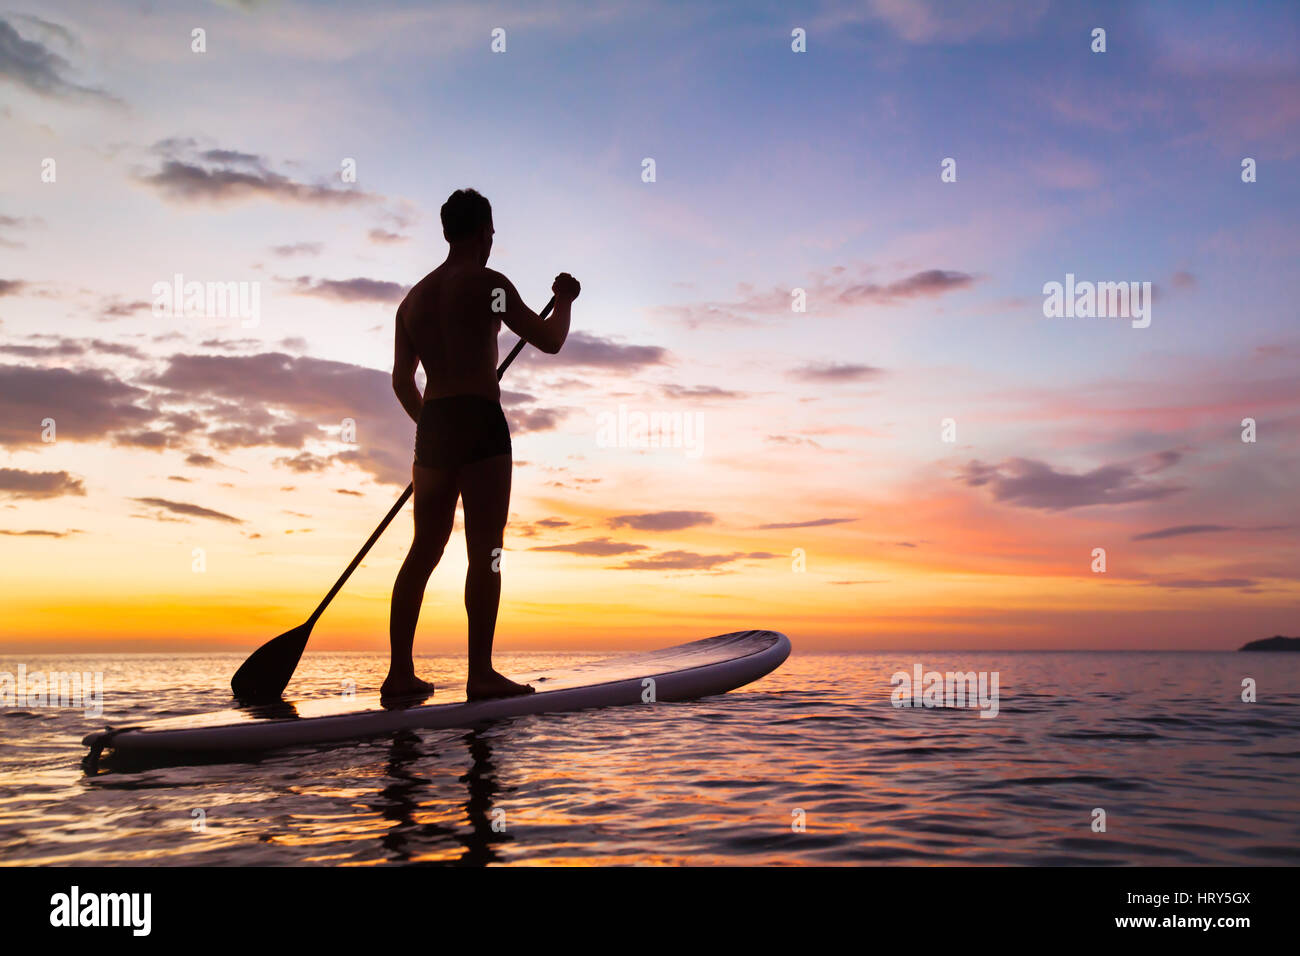 paddleboard on the beach at sunset, paddle standing in Thailand Stock Photo